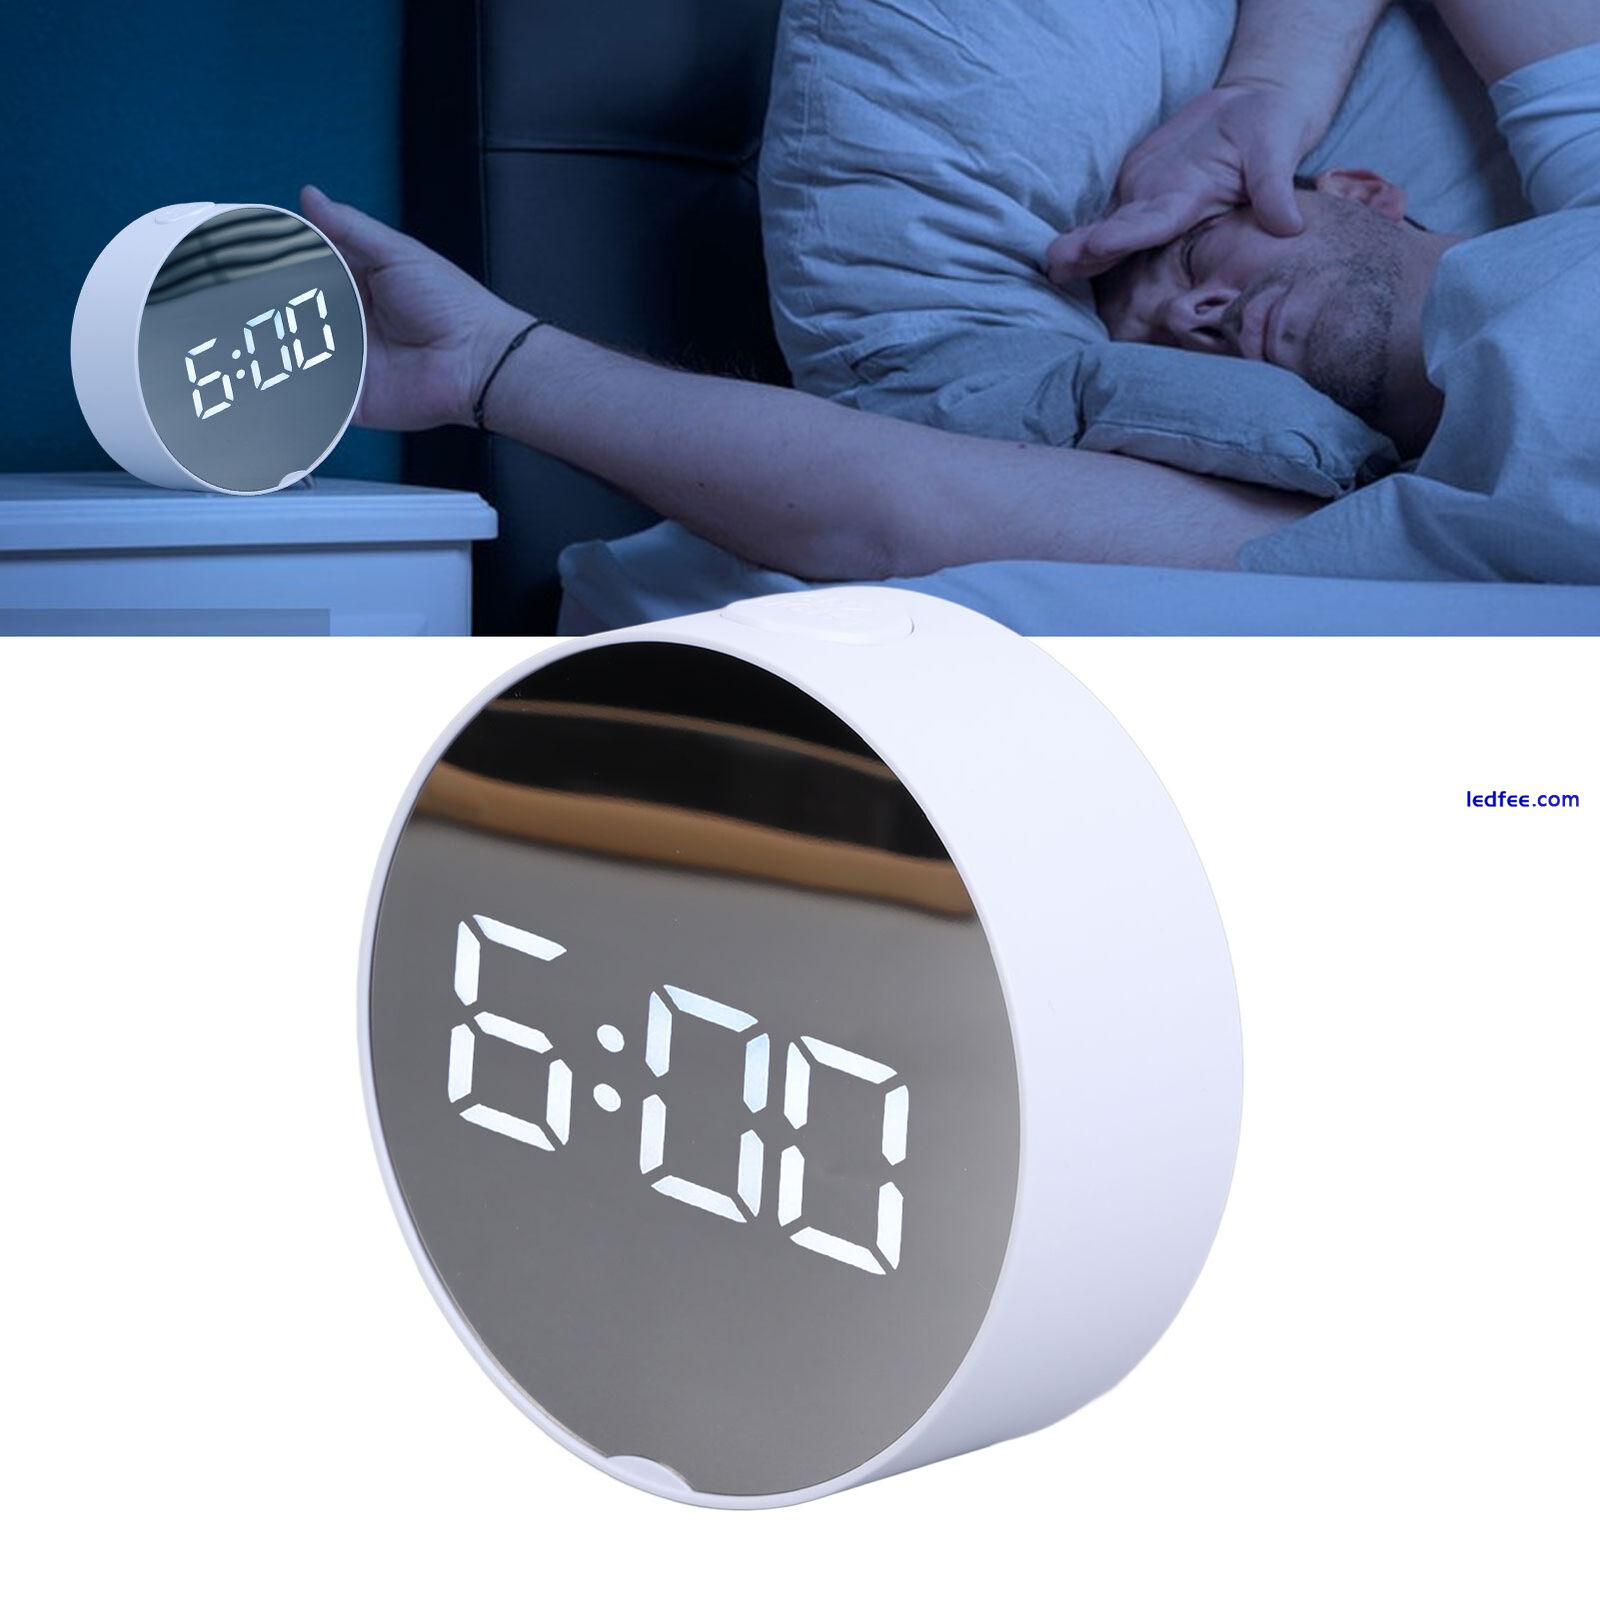 LED Mirror Alarm Easy To Read Portable Mirror Clock For Home 2 